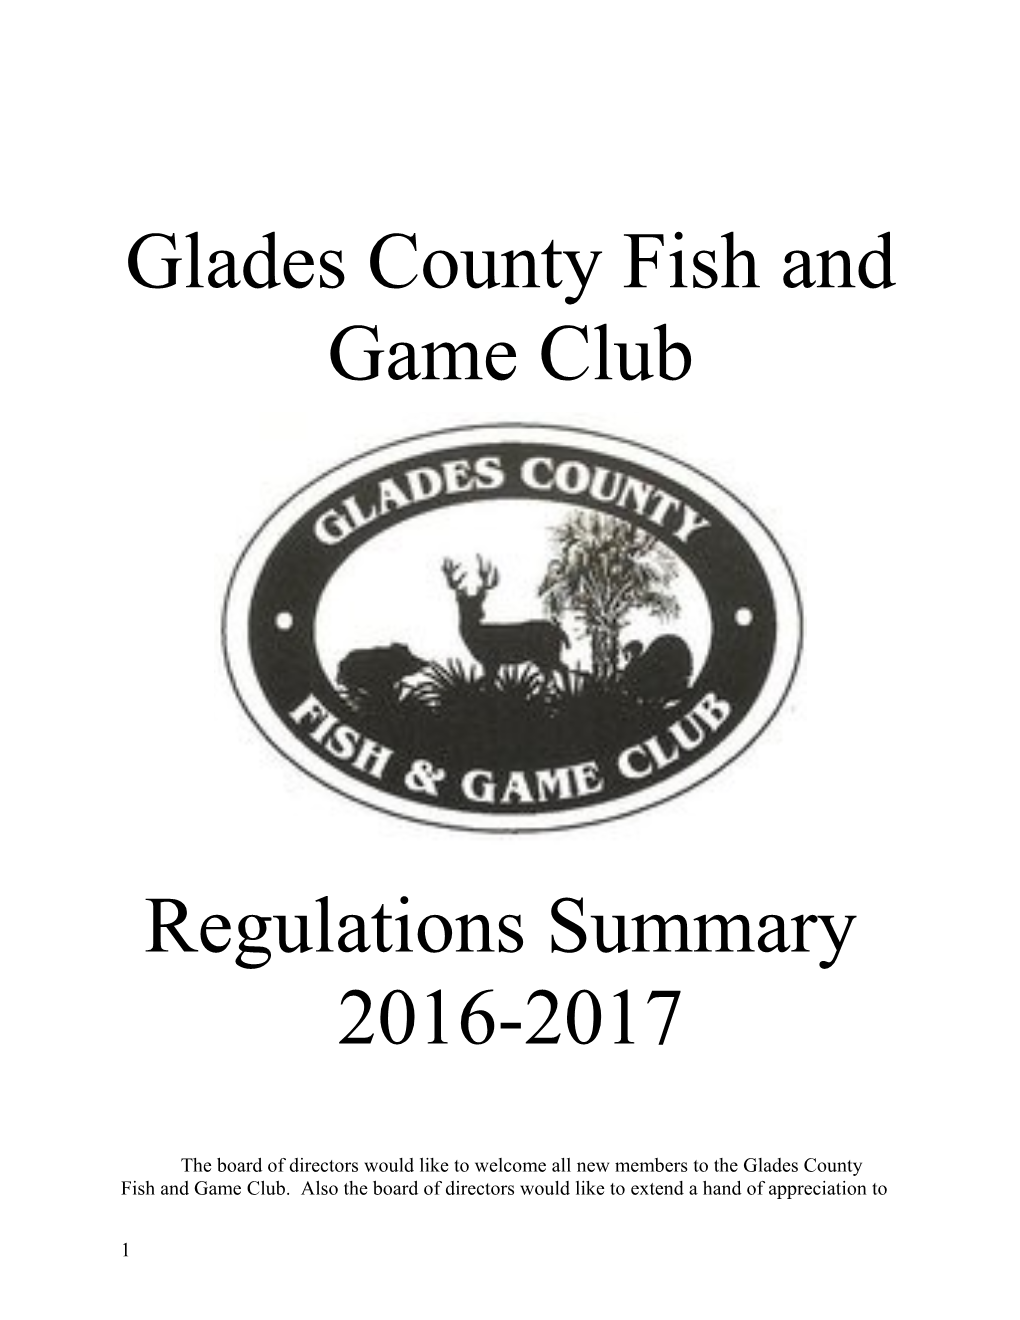 Glades County Fish and Game Club